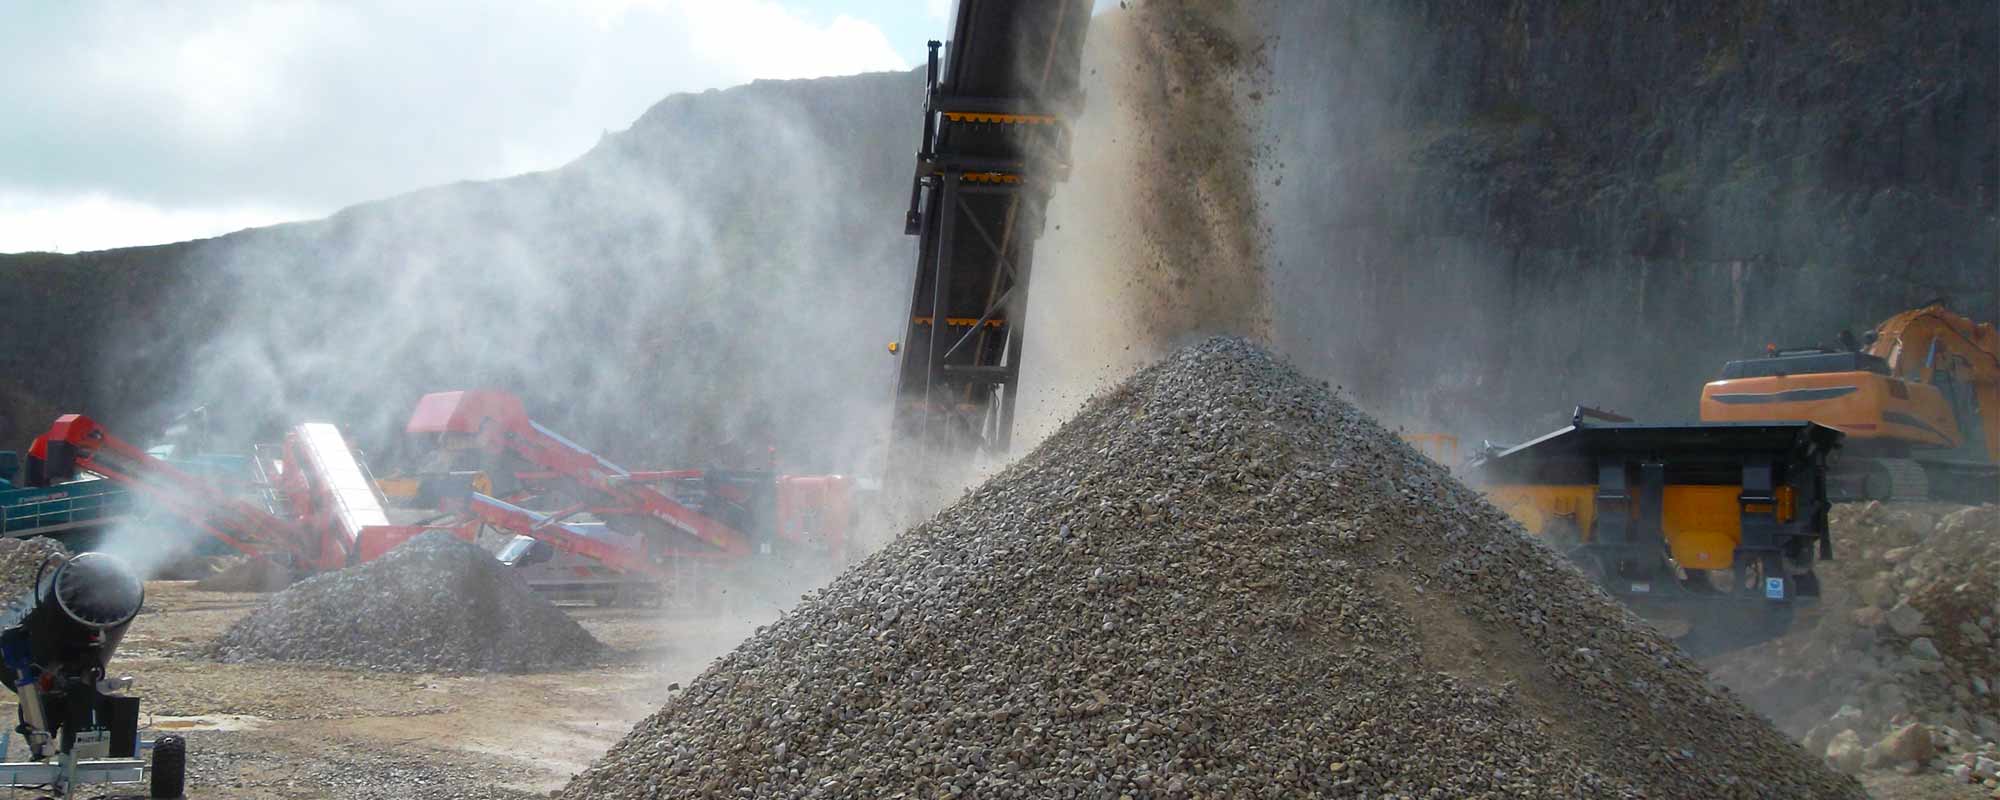 Dust suppression during stone crushing operations